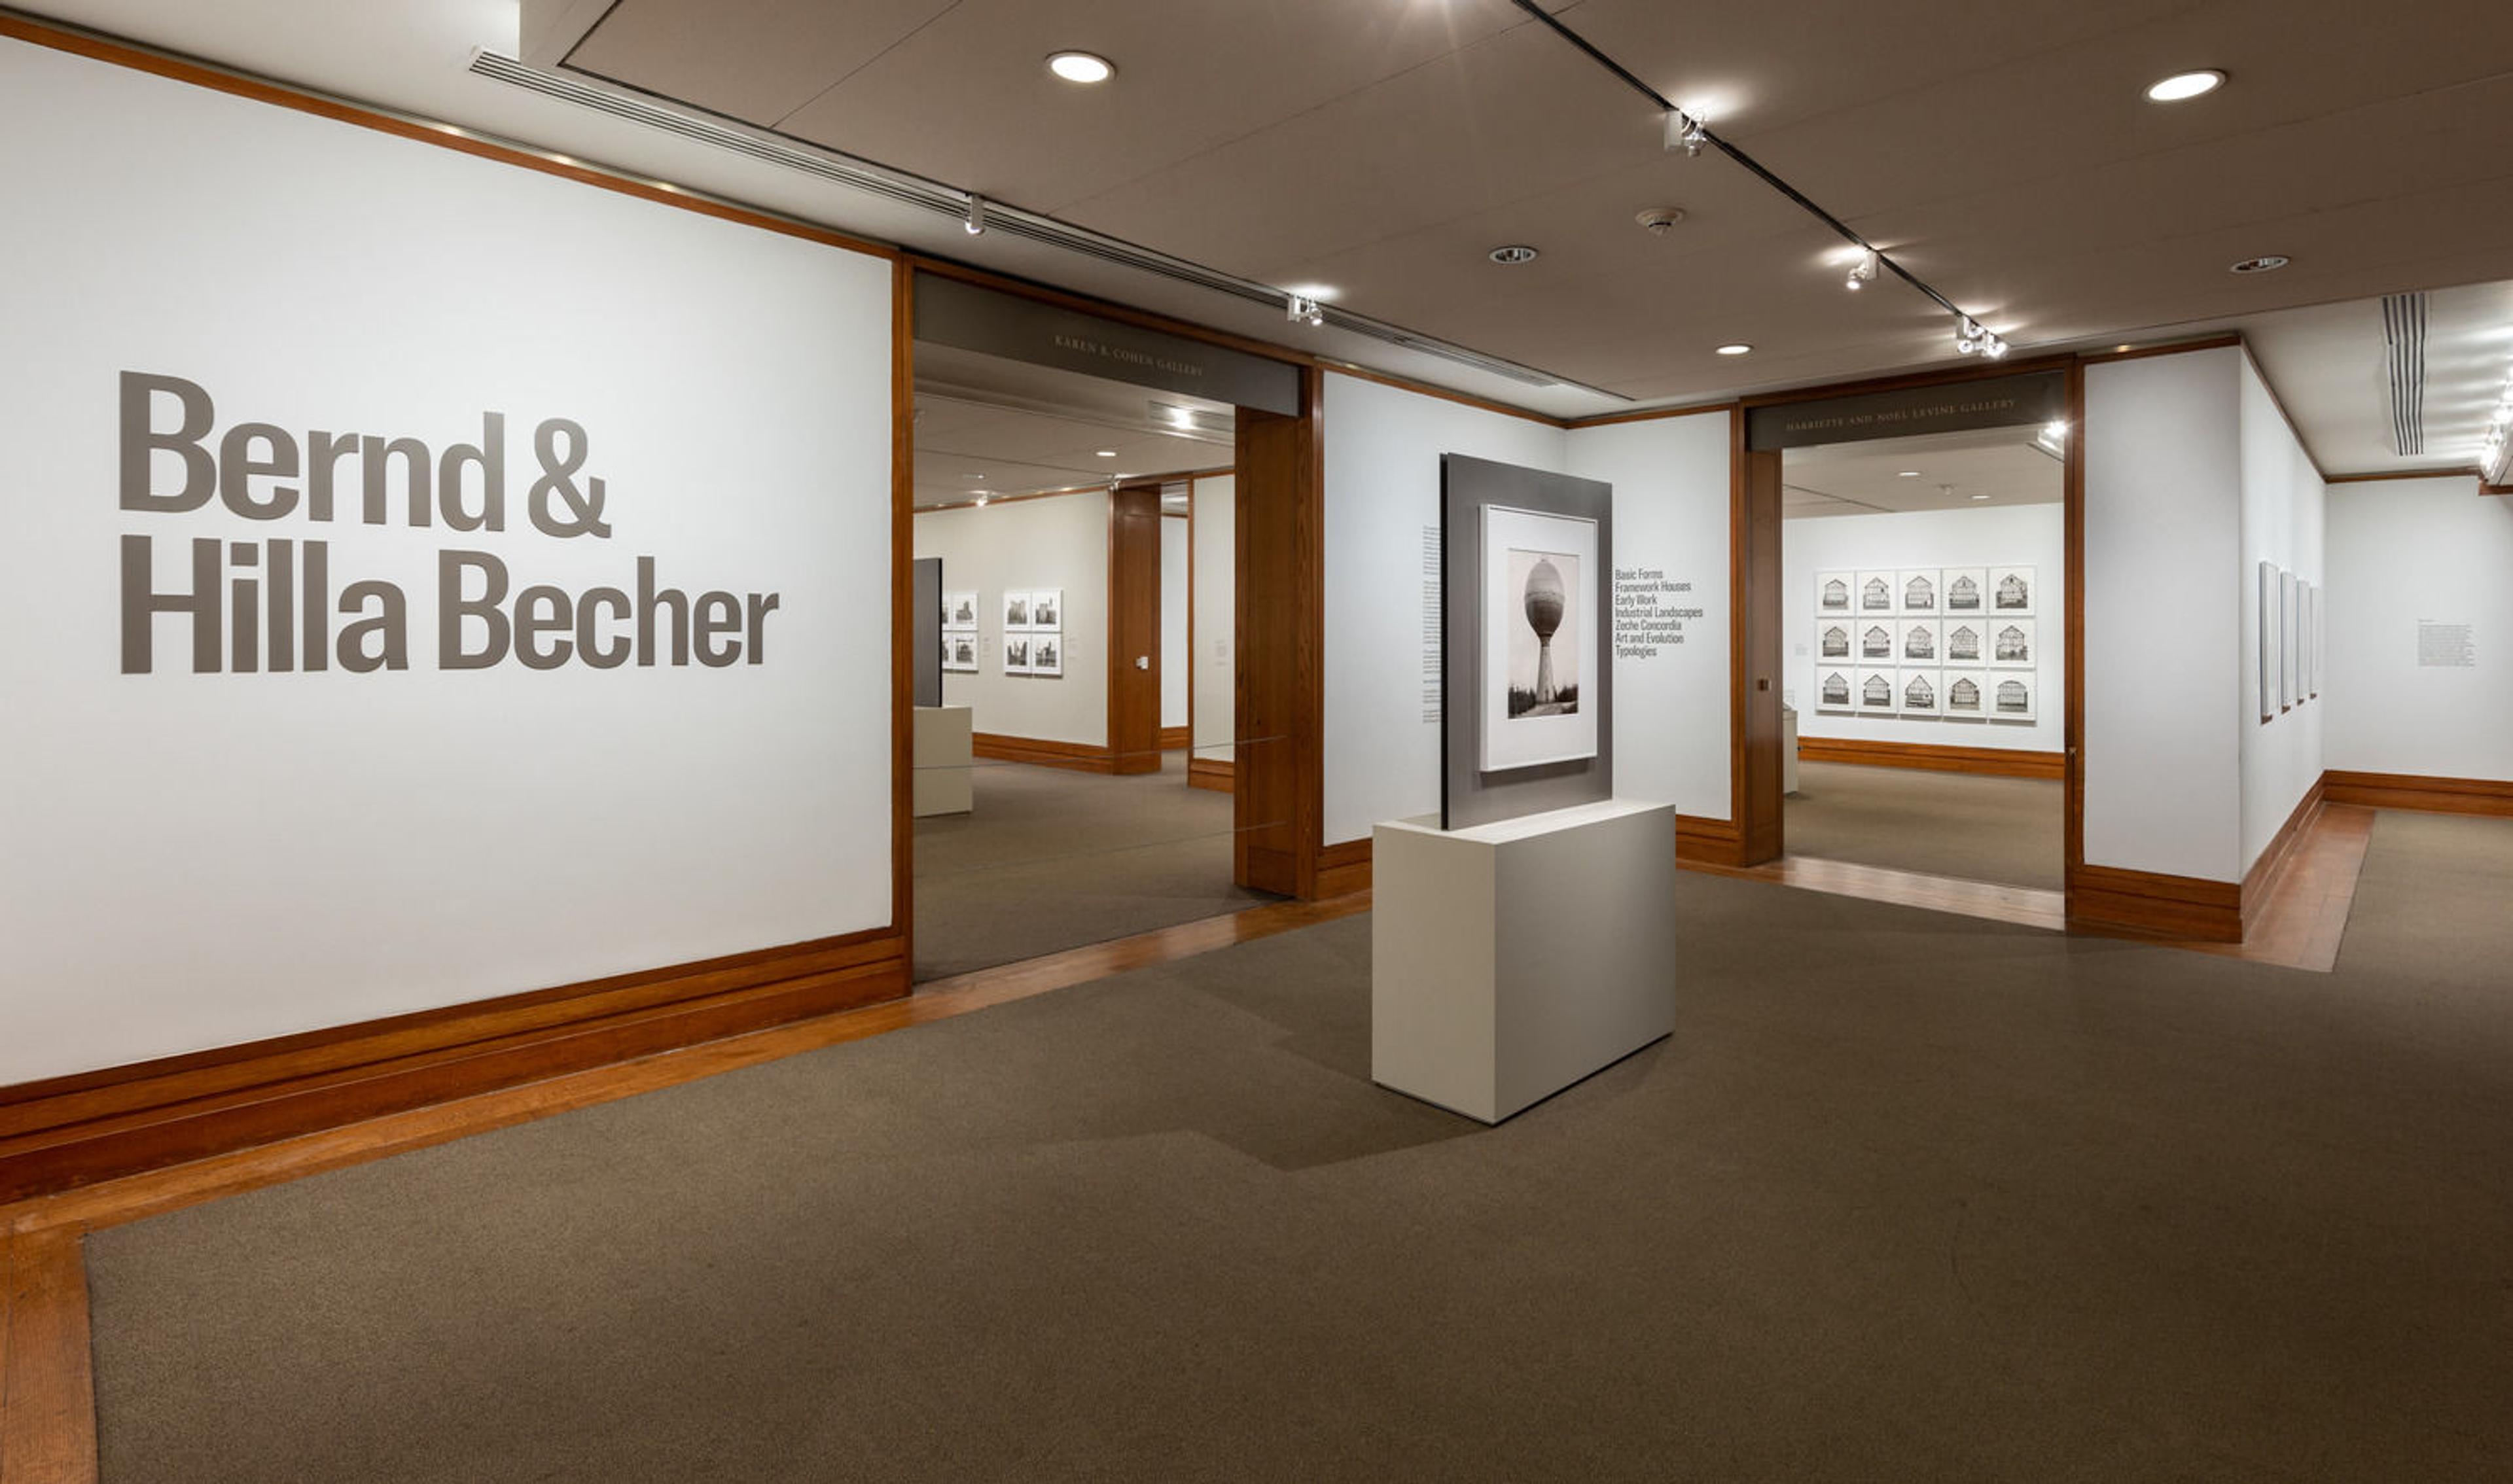 Photograph of gallery space with photographs, wood panelling, and "Bernd & Hilla Becher" printed on the wall.